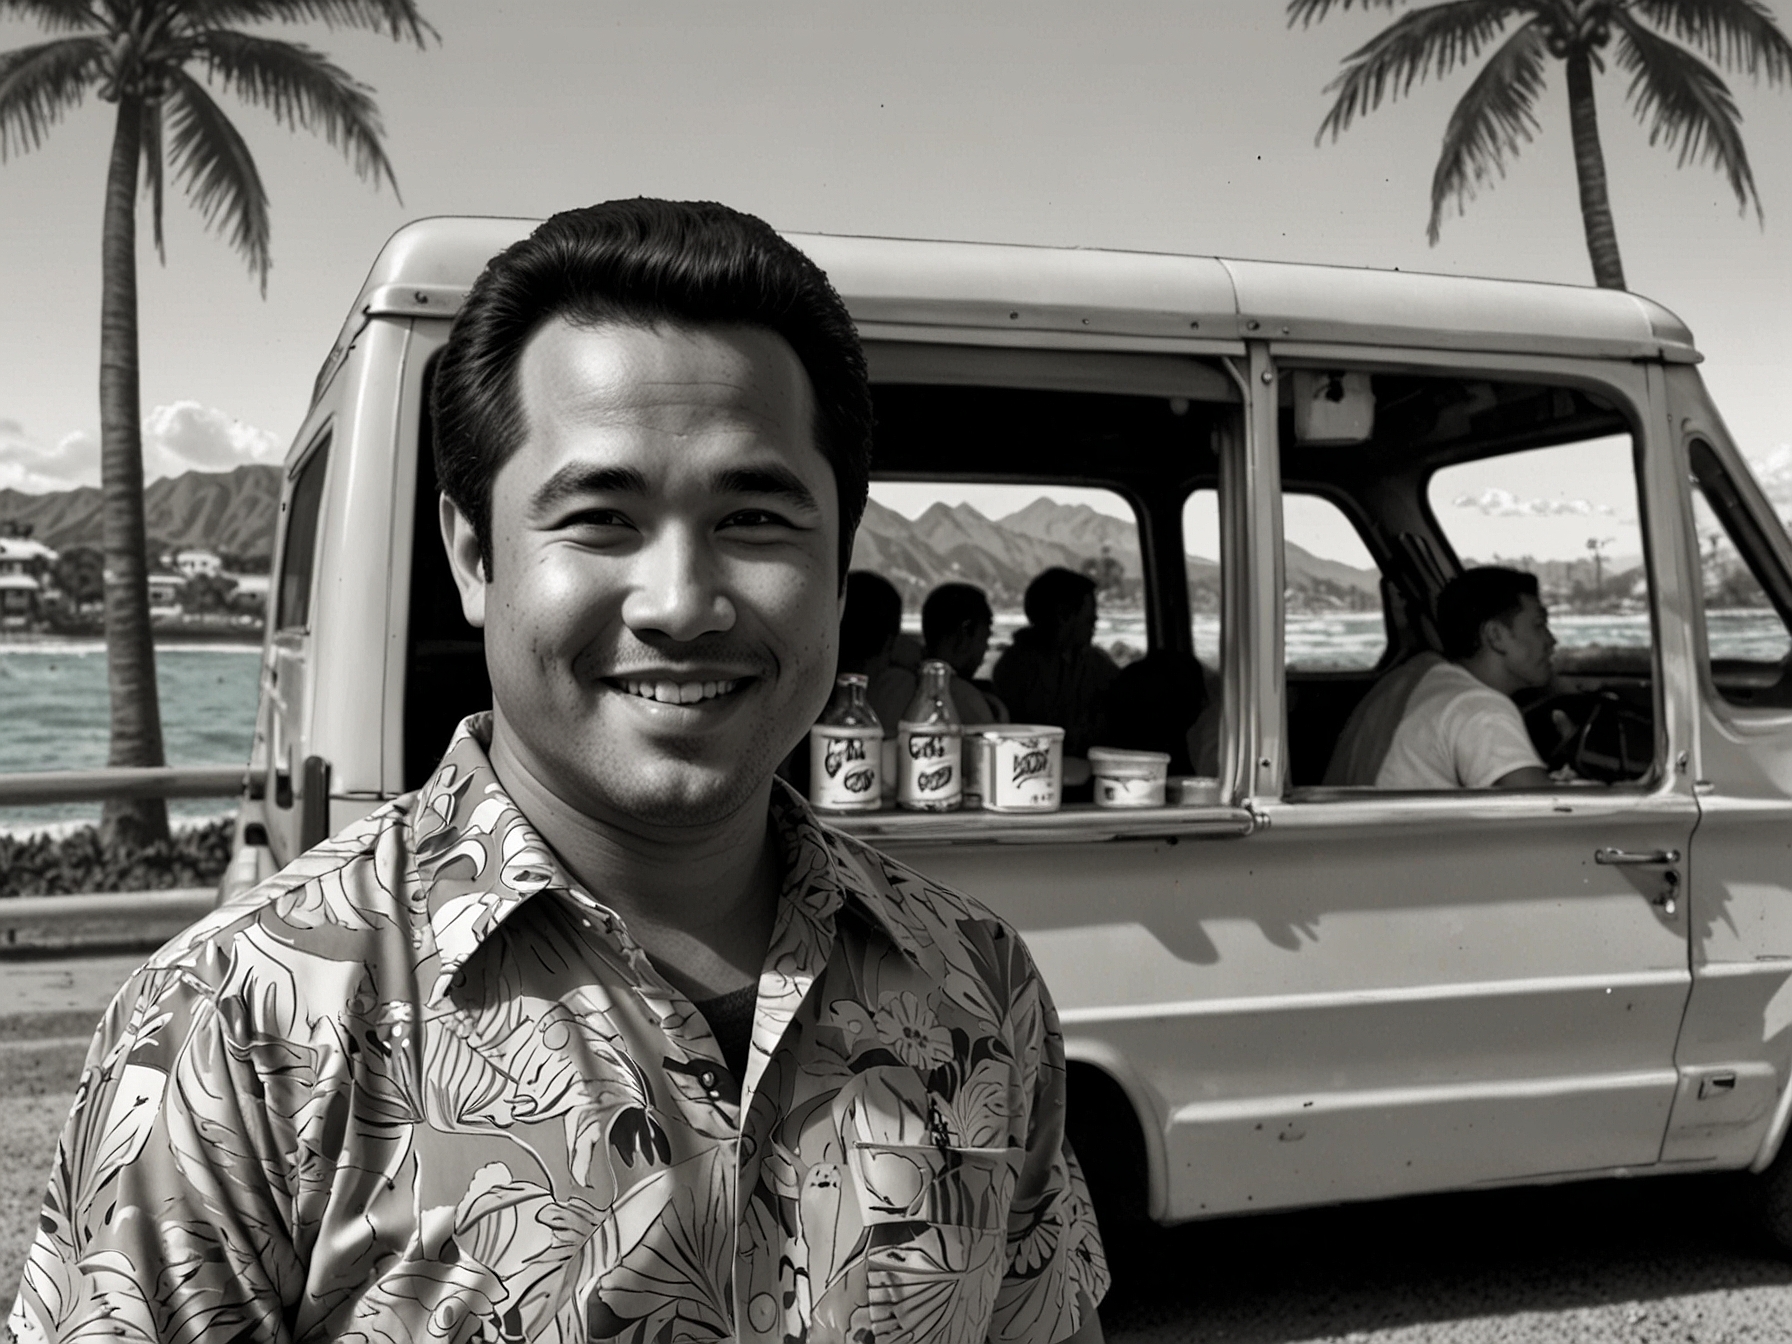 A heartfelt tribute image featuring Taylor Wily as Kamekona Tupuola from 'Hawaii Five-0', showing him at his iconic shrimp truck, symbolizing his cheerful personality and cultural impact.